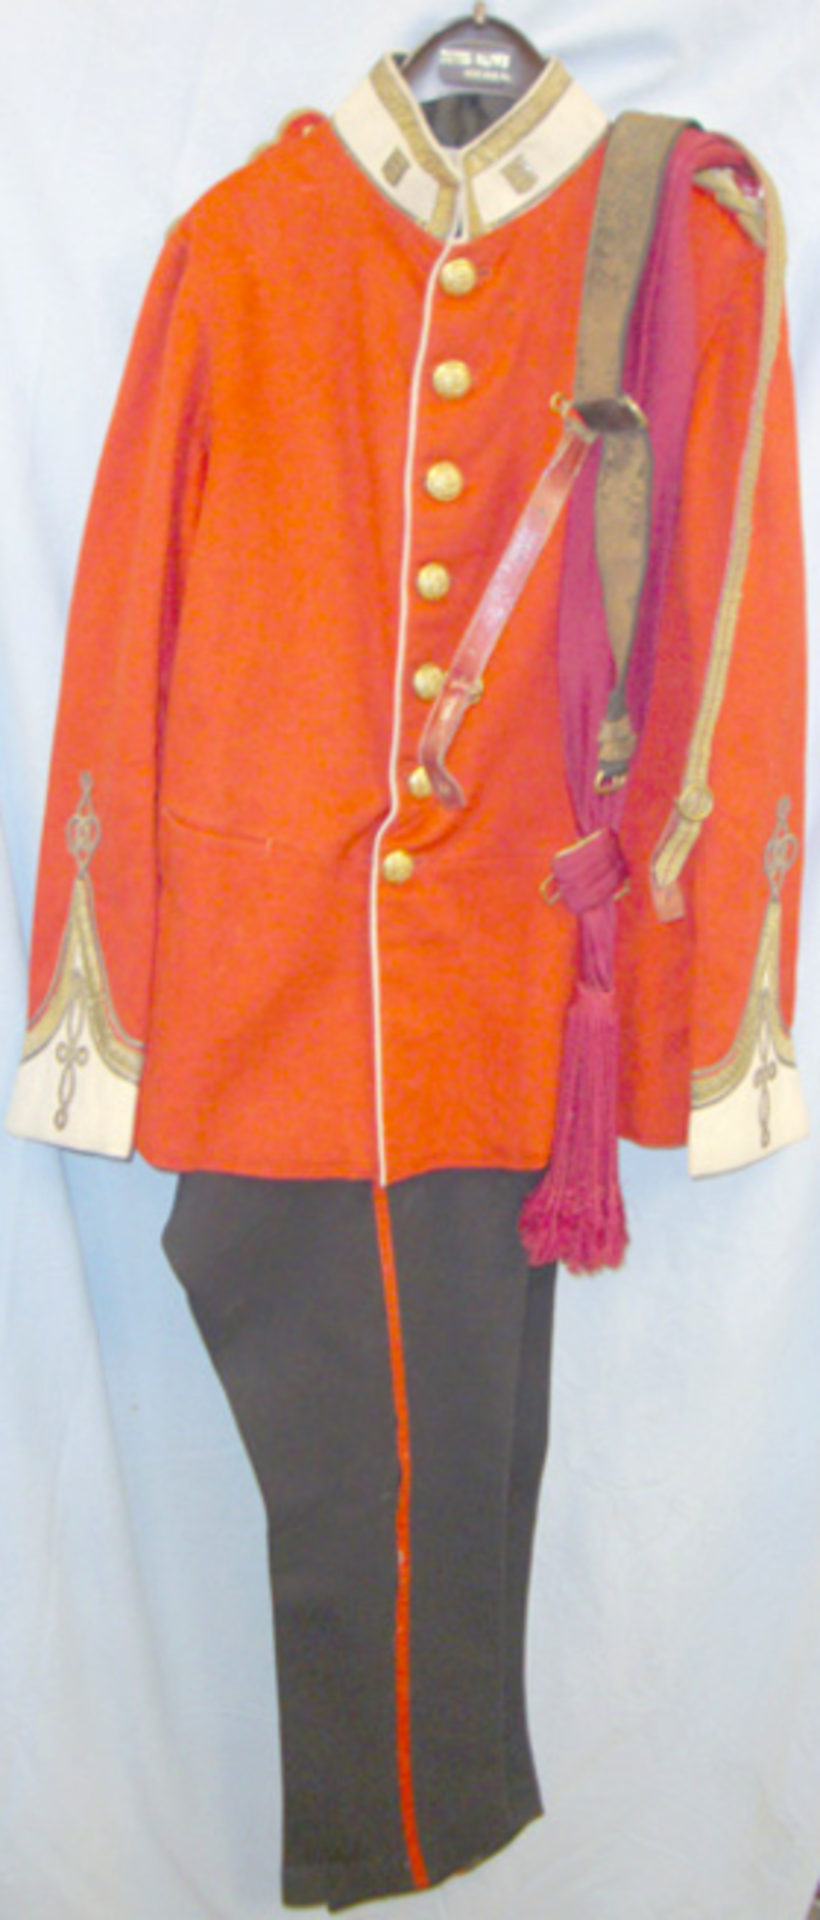 Captains Full Dress Uniform (Scarlet Tunic & Black Overall Trousers) Essex Regiment.   This is an